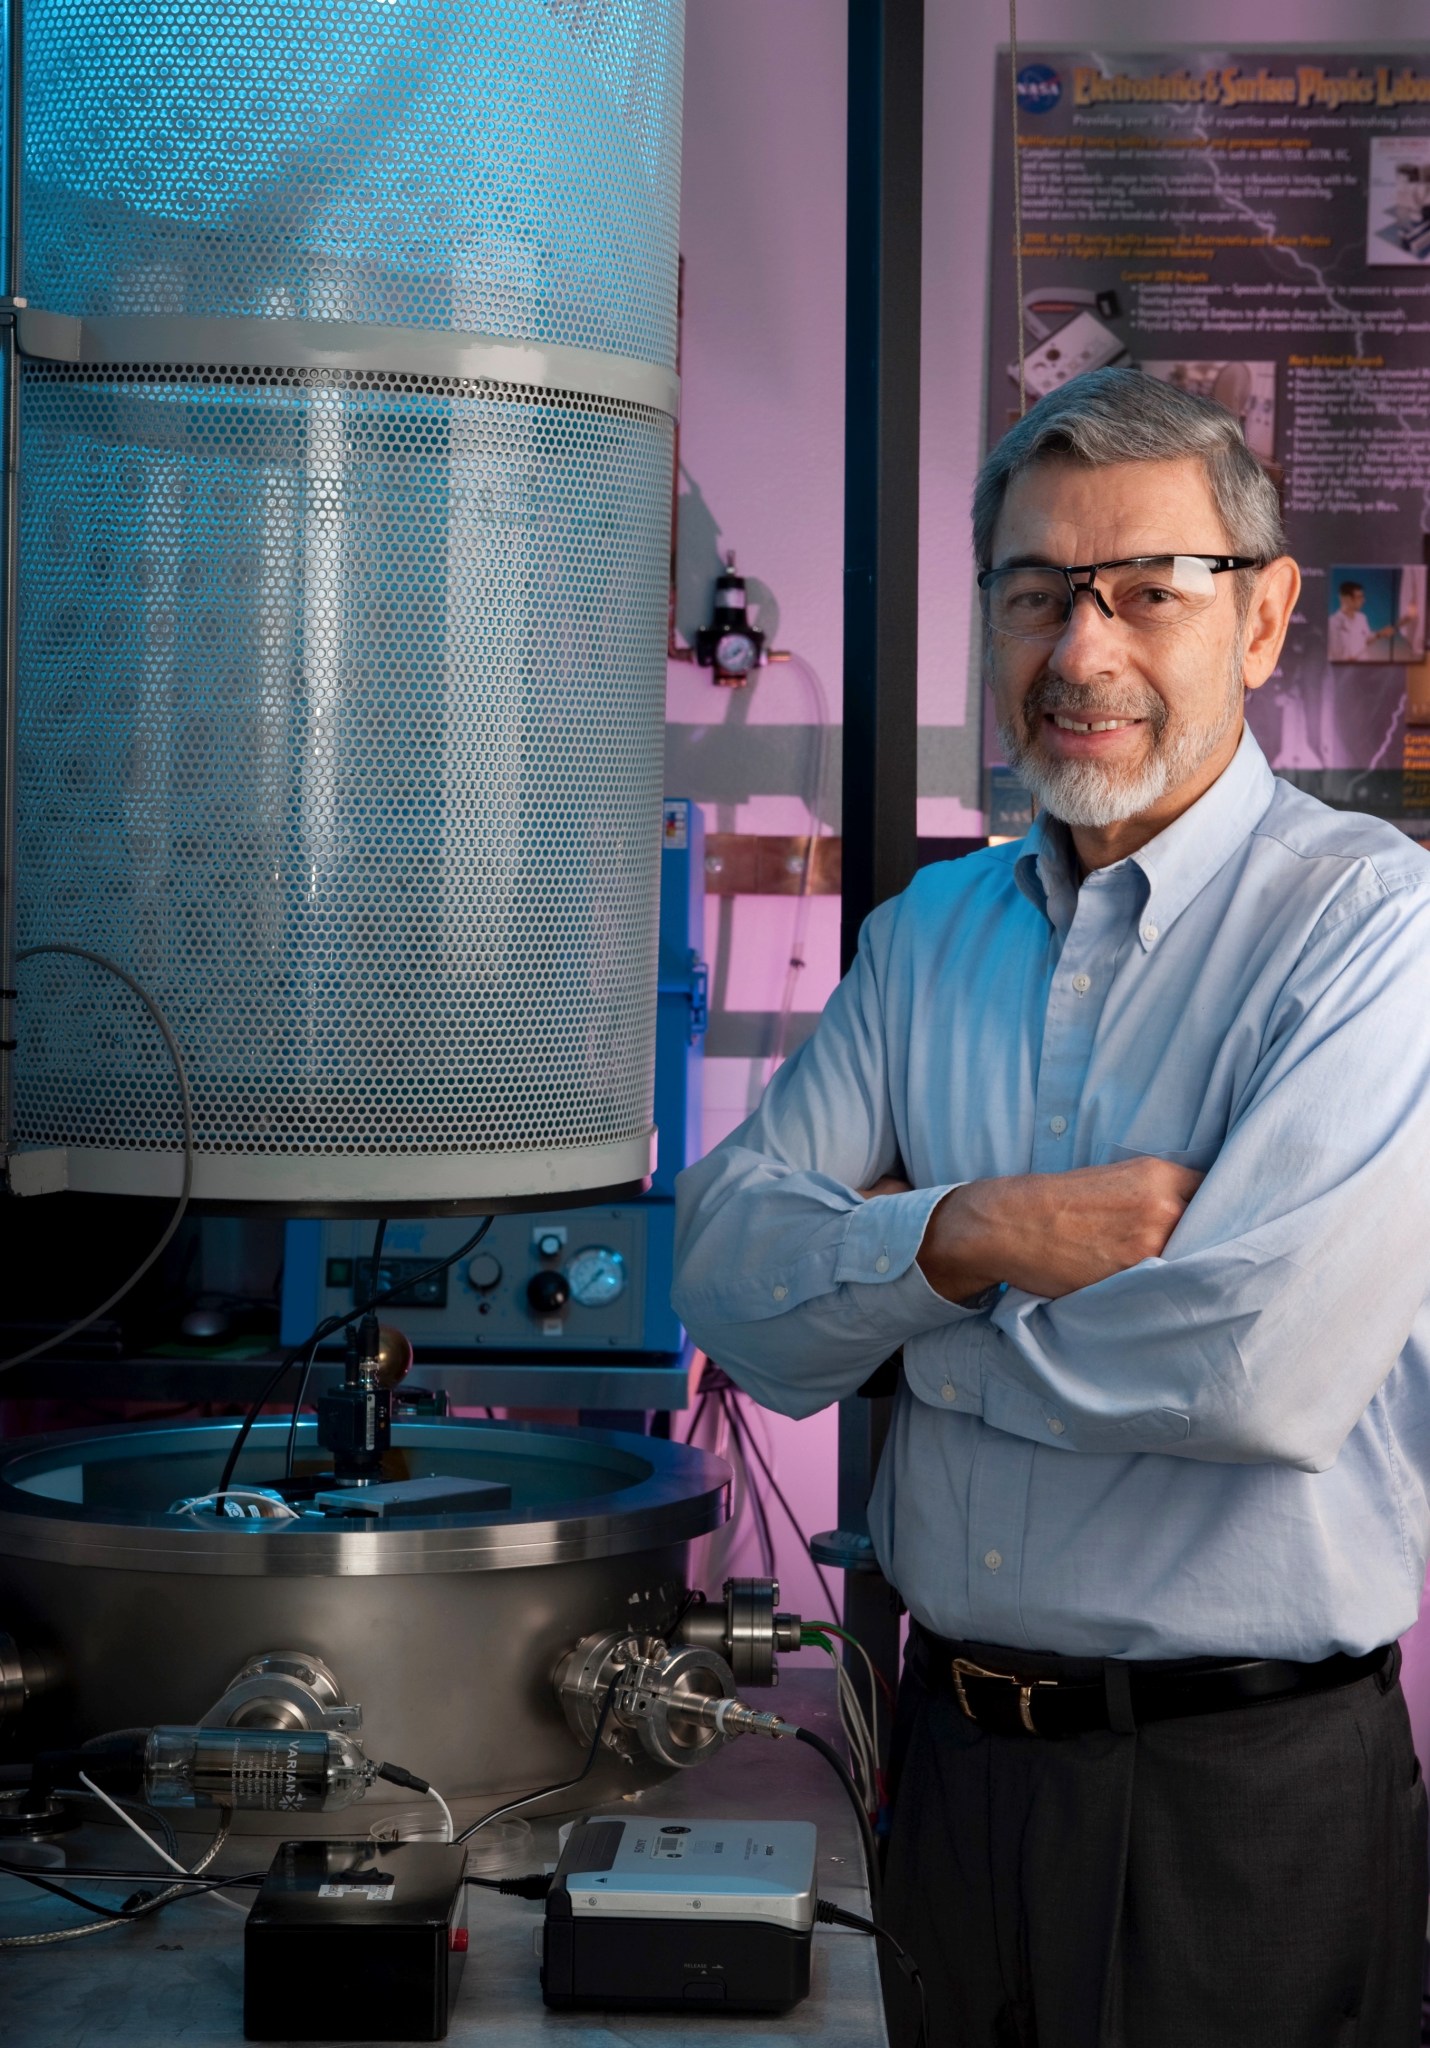 Dr. Carlos Calle has worked on the Electrostatic Dust Shield (EDS) for 15 years.